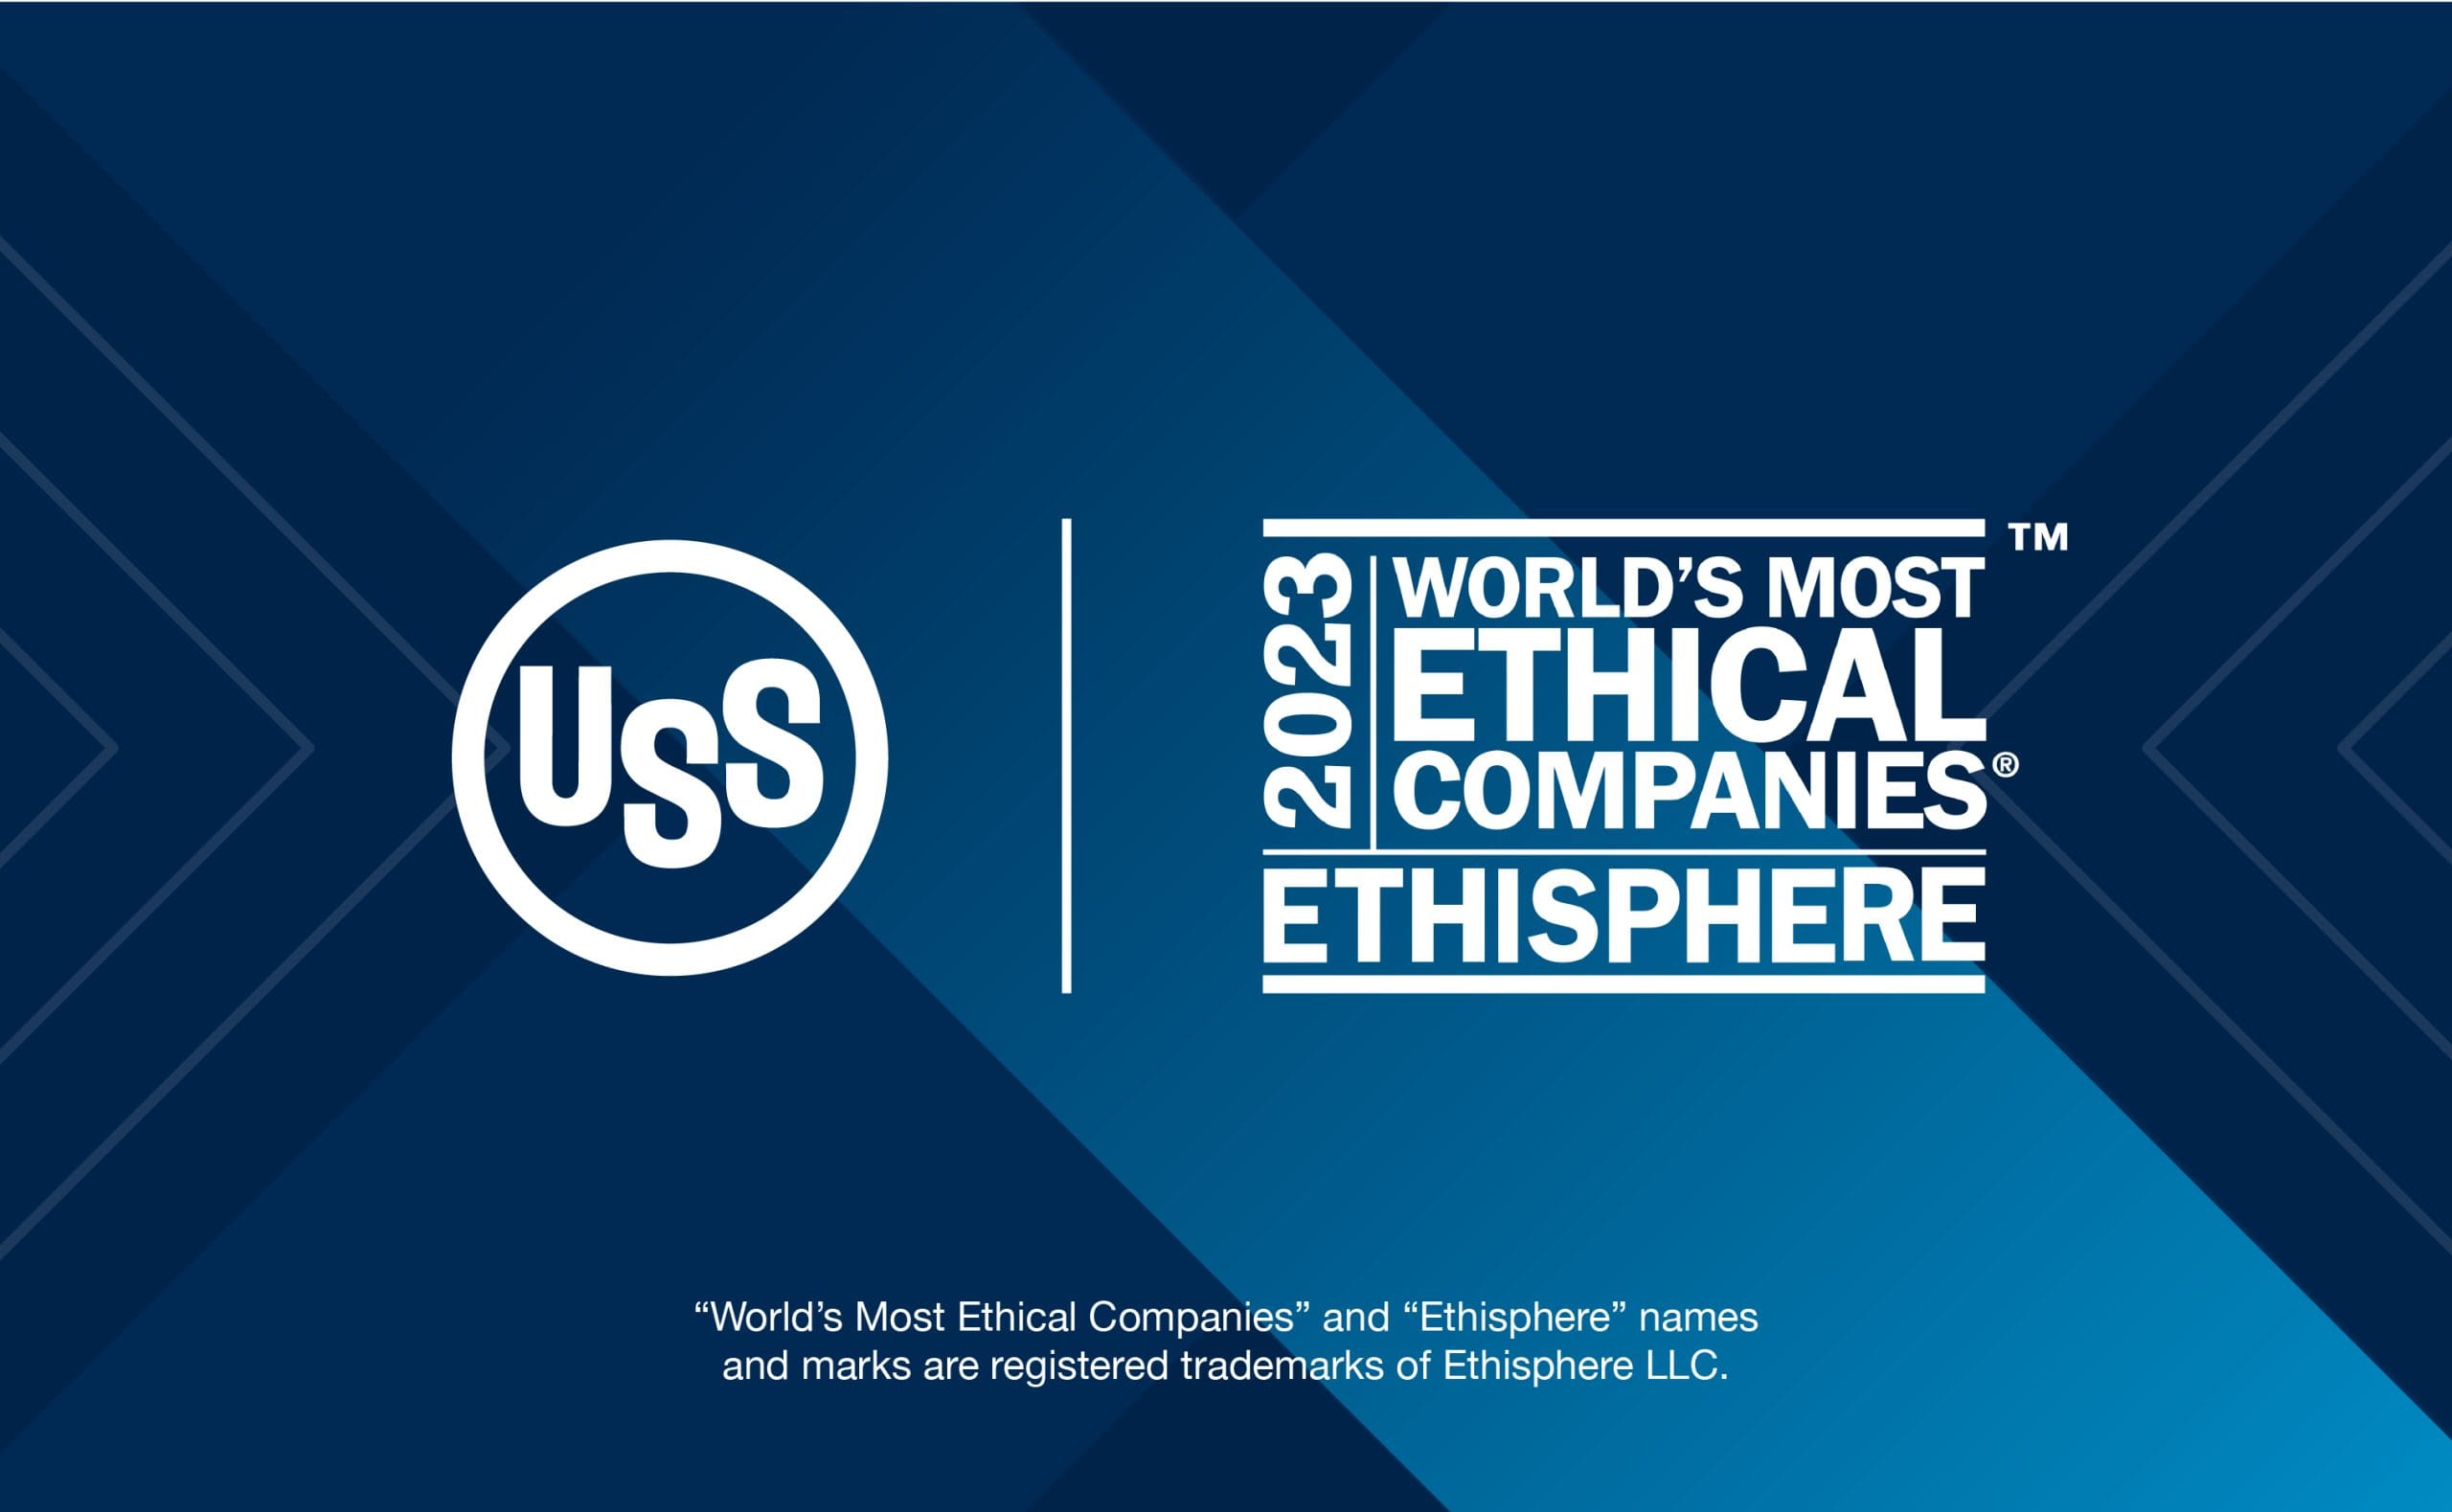 World’s Most Ethical Companies